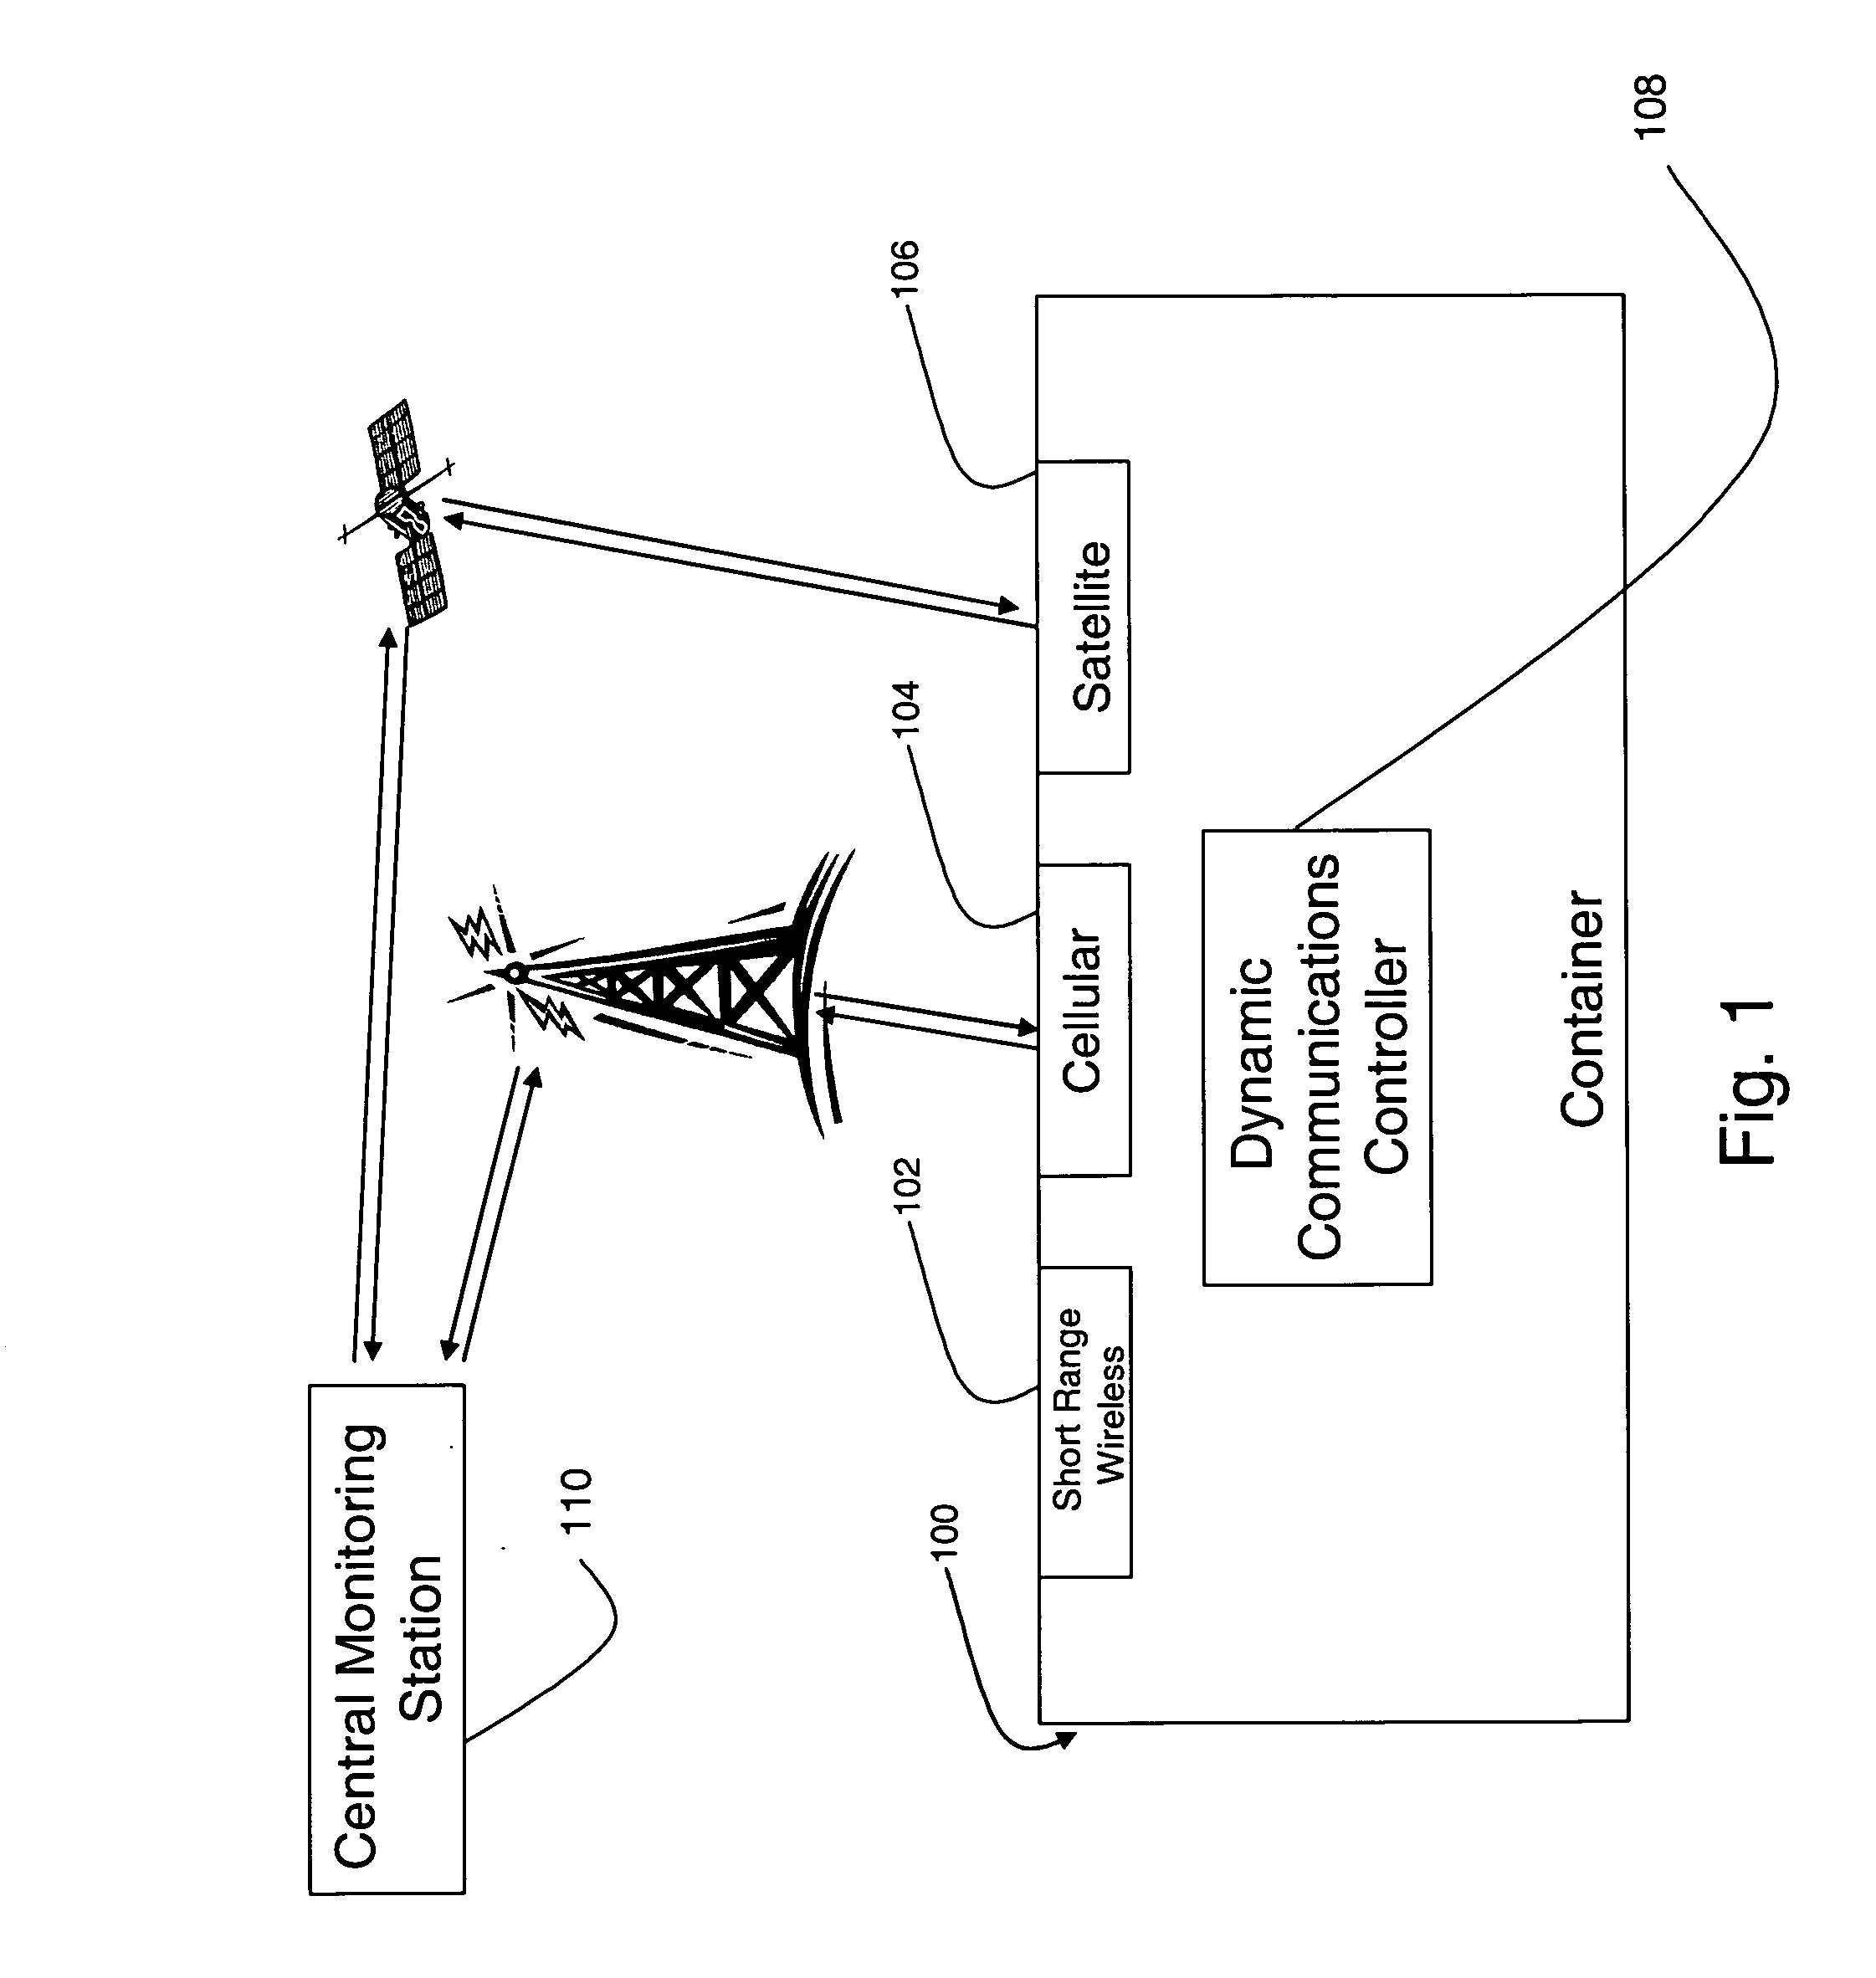 System and method for communications of cargo containers in a container security system using wireless ad-hoc networking techniques